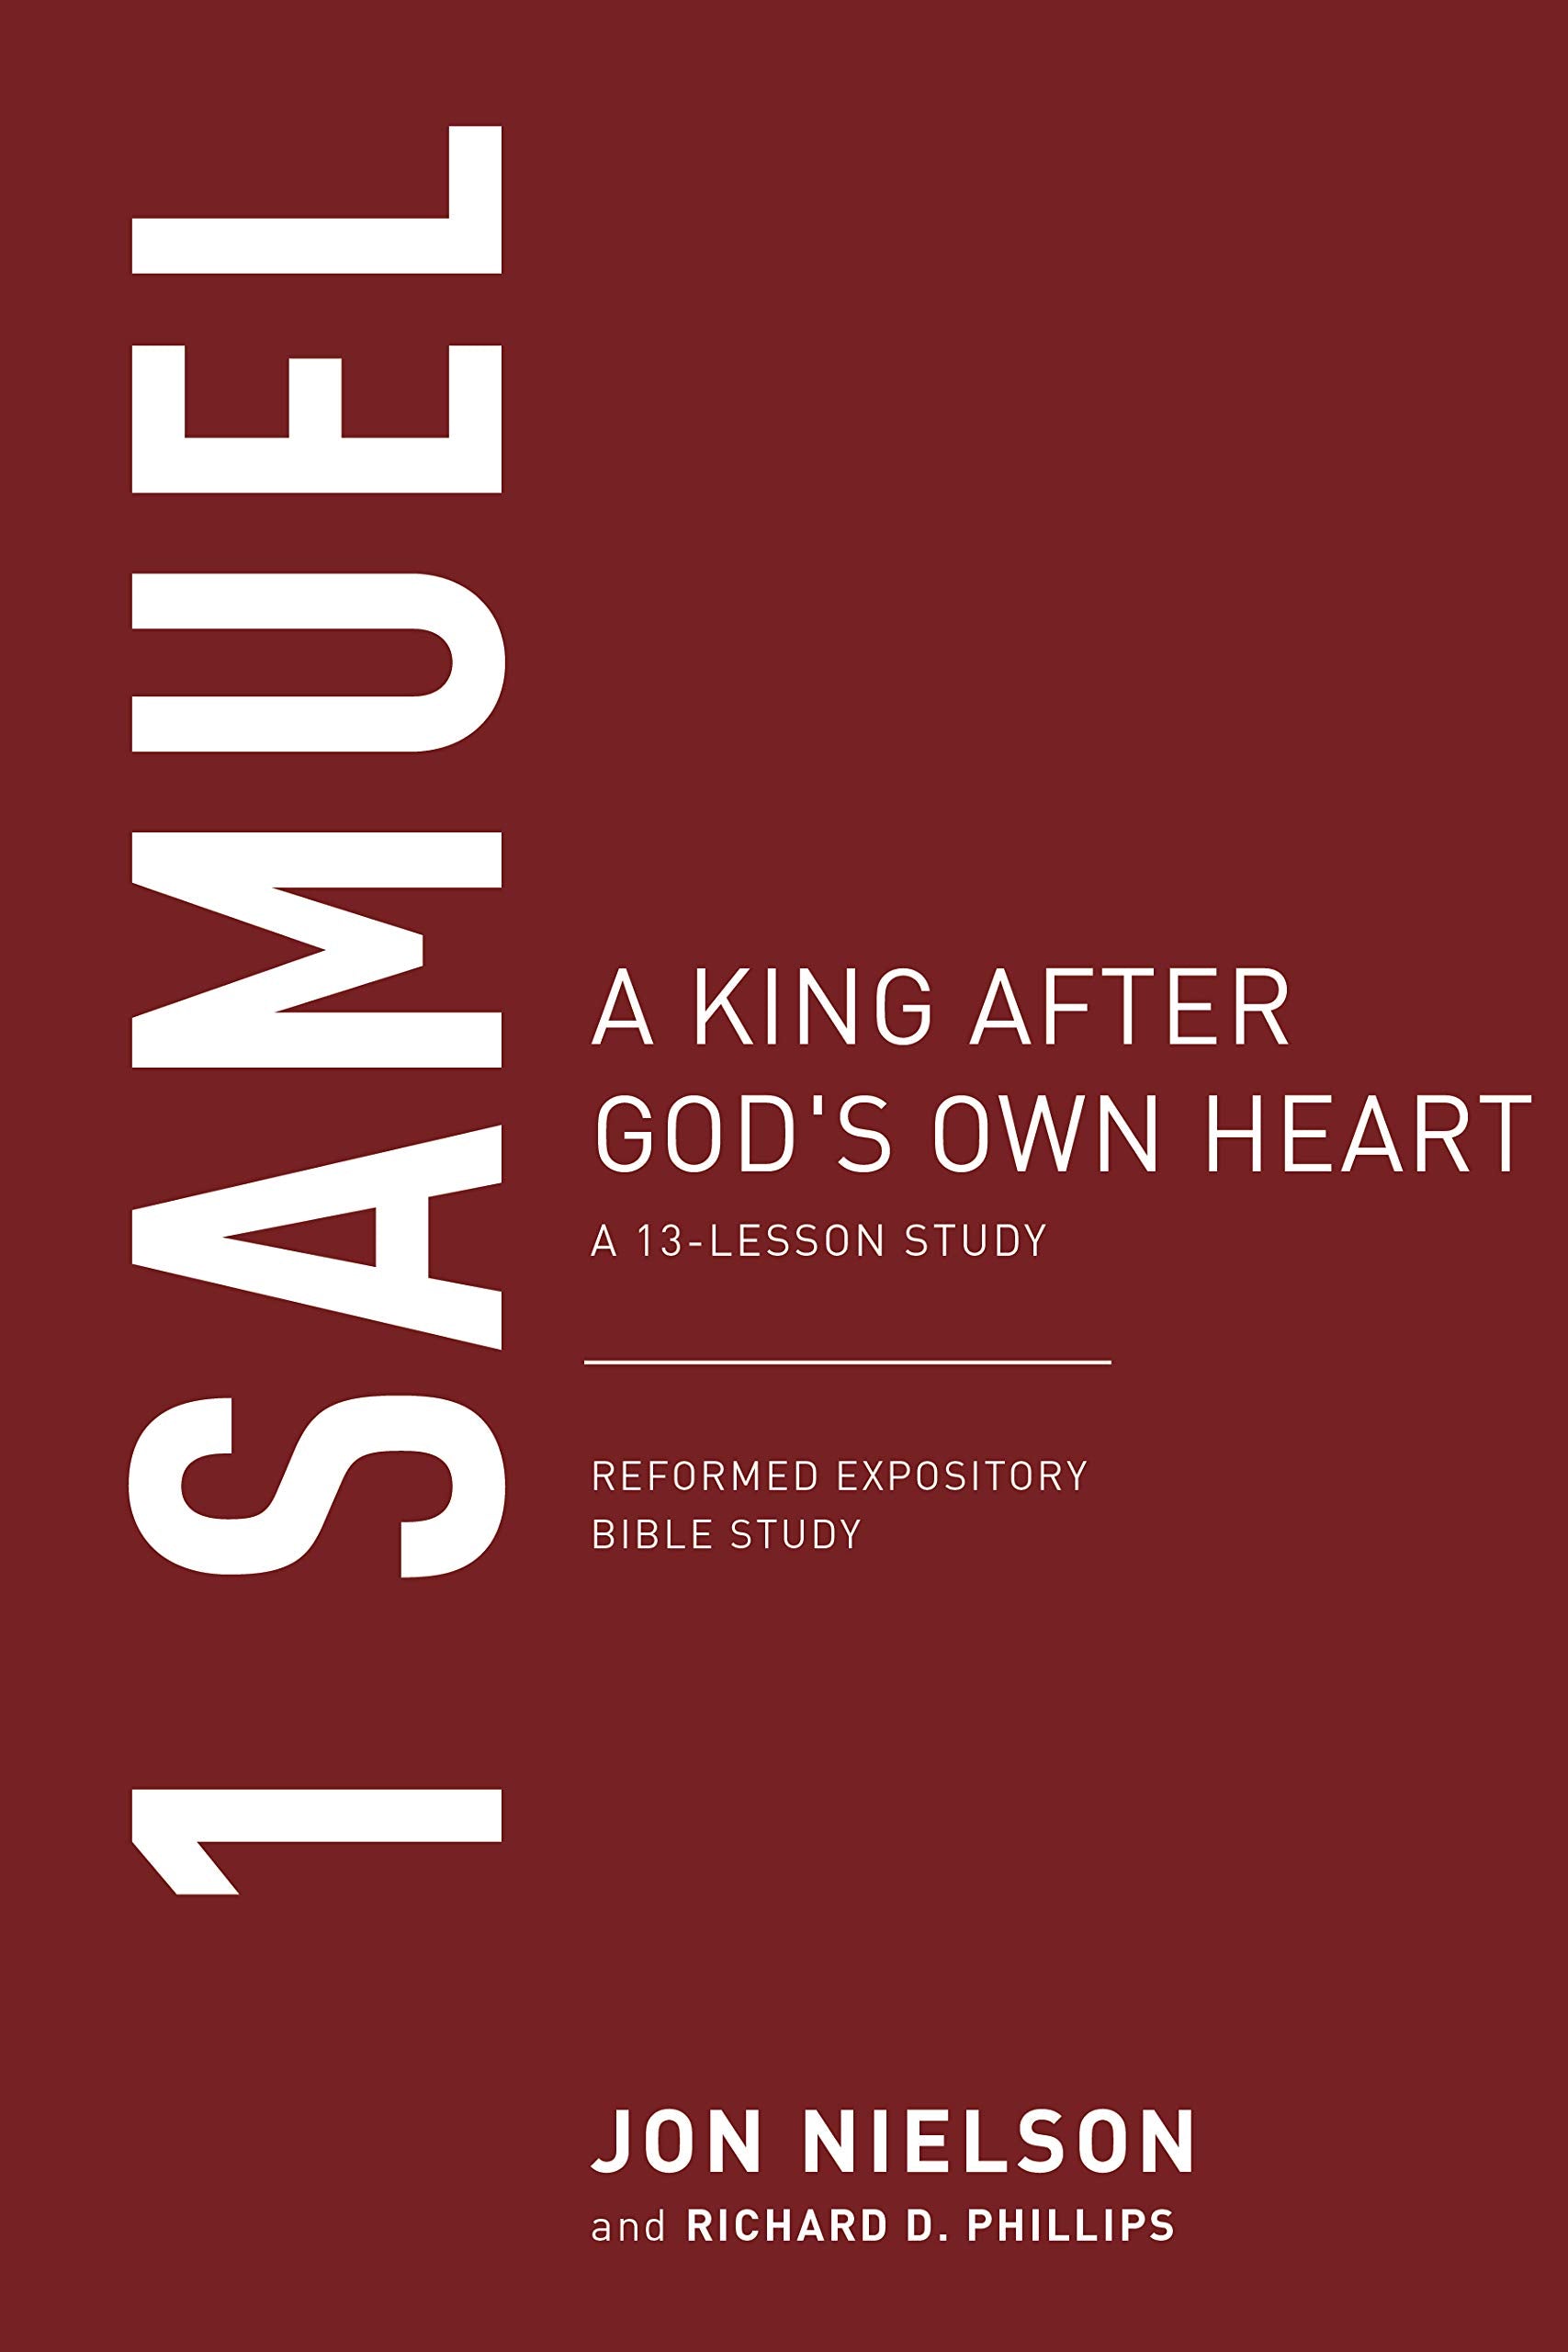 Nielson,　–　Westminster　Studies)　King　Own　(Reformed　9781629958385　Jonathan　Bible　Heart,　Expository　After　A　Study　Bookstore　A　God's　Samuel:　13-Lesson